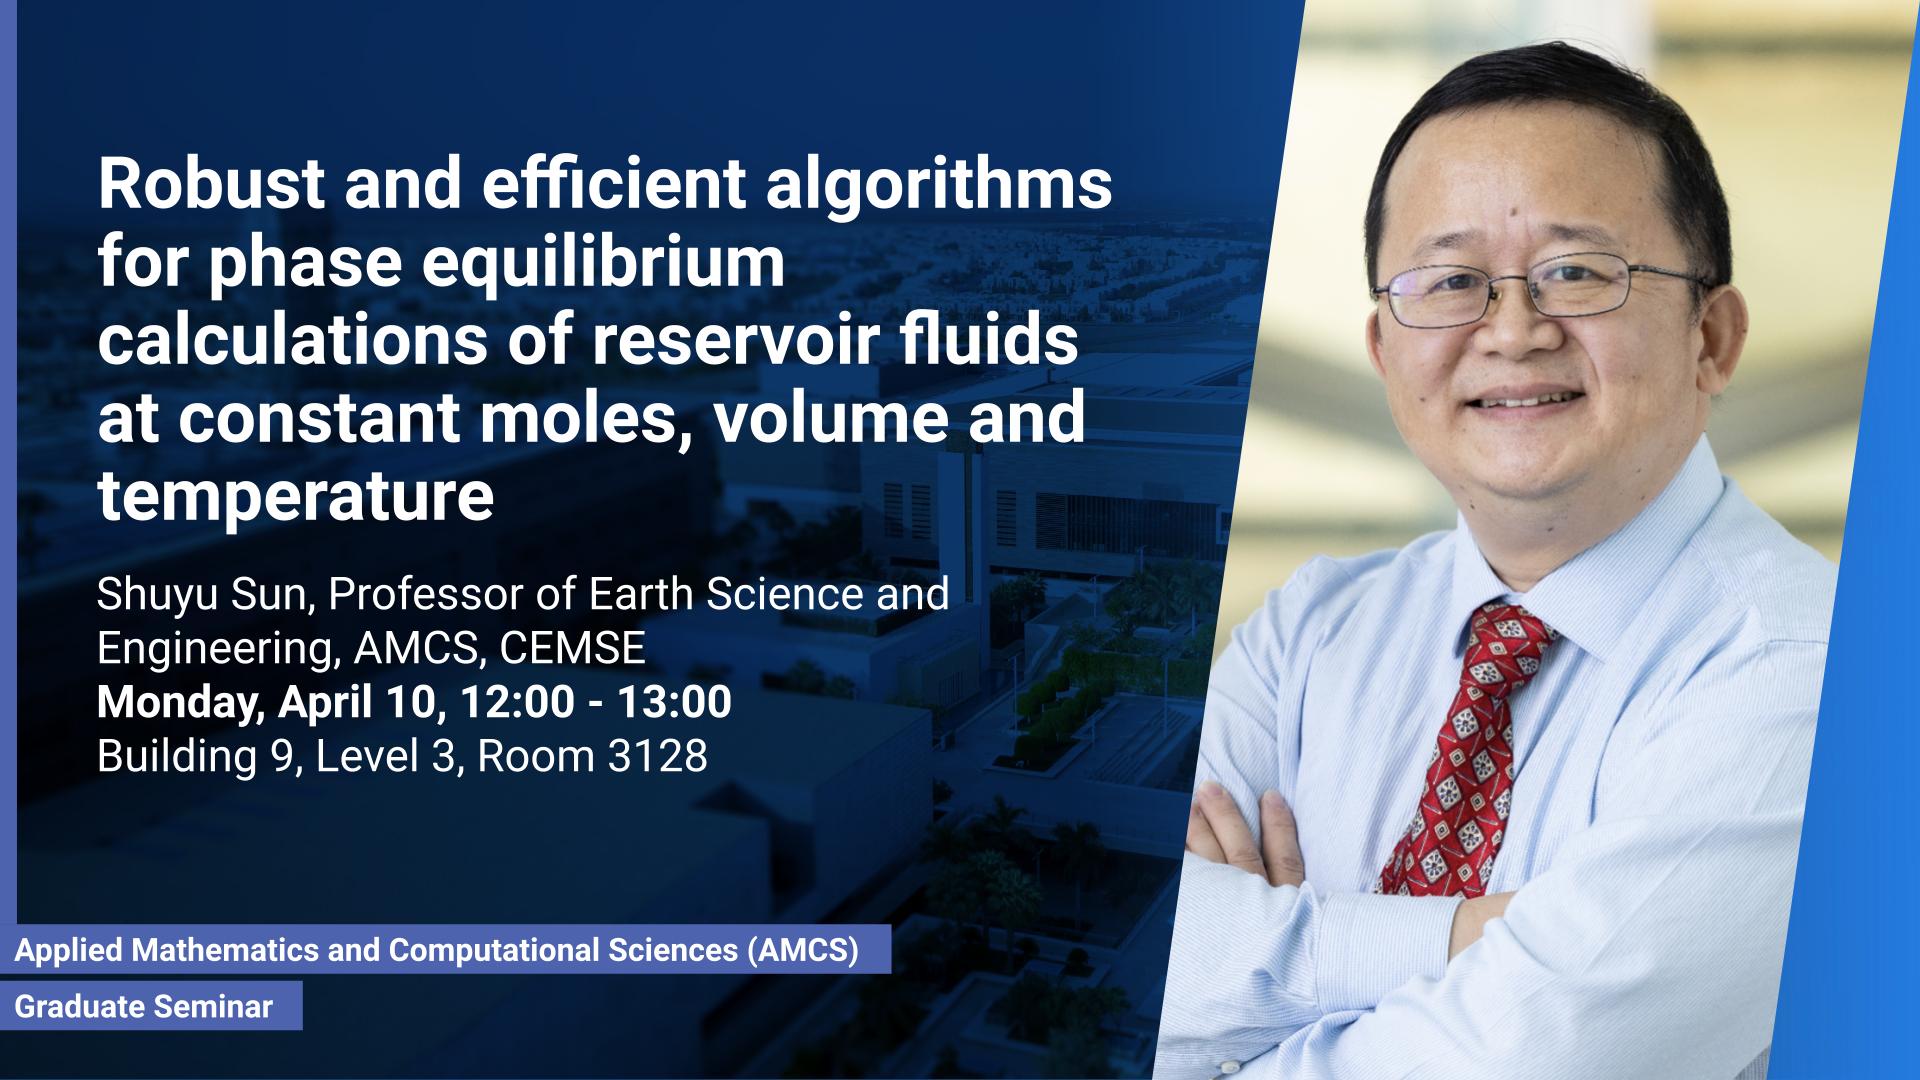 KAUST CEMSE AMCS Graduate Seminar Shuyu Sun Robust and efficient algorithms for phase equilibrium calculations of reservoir fluids at constant moles